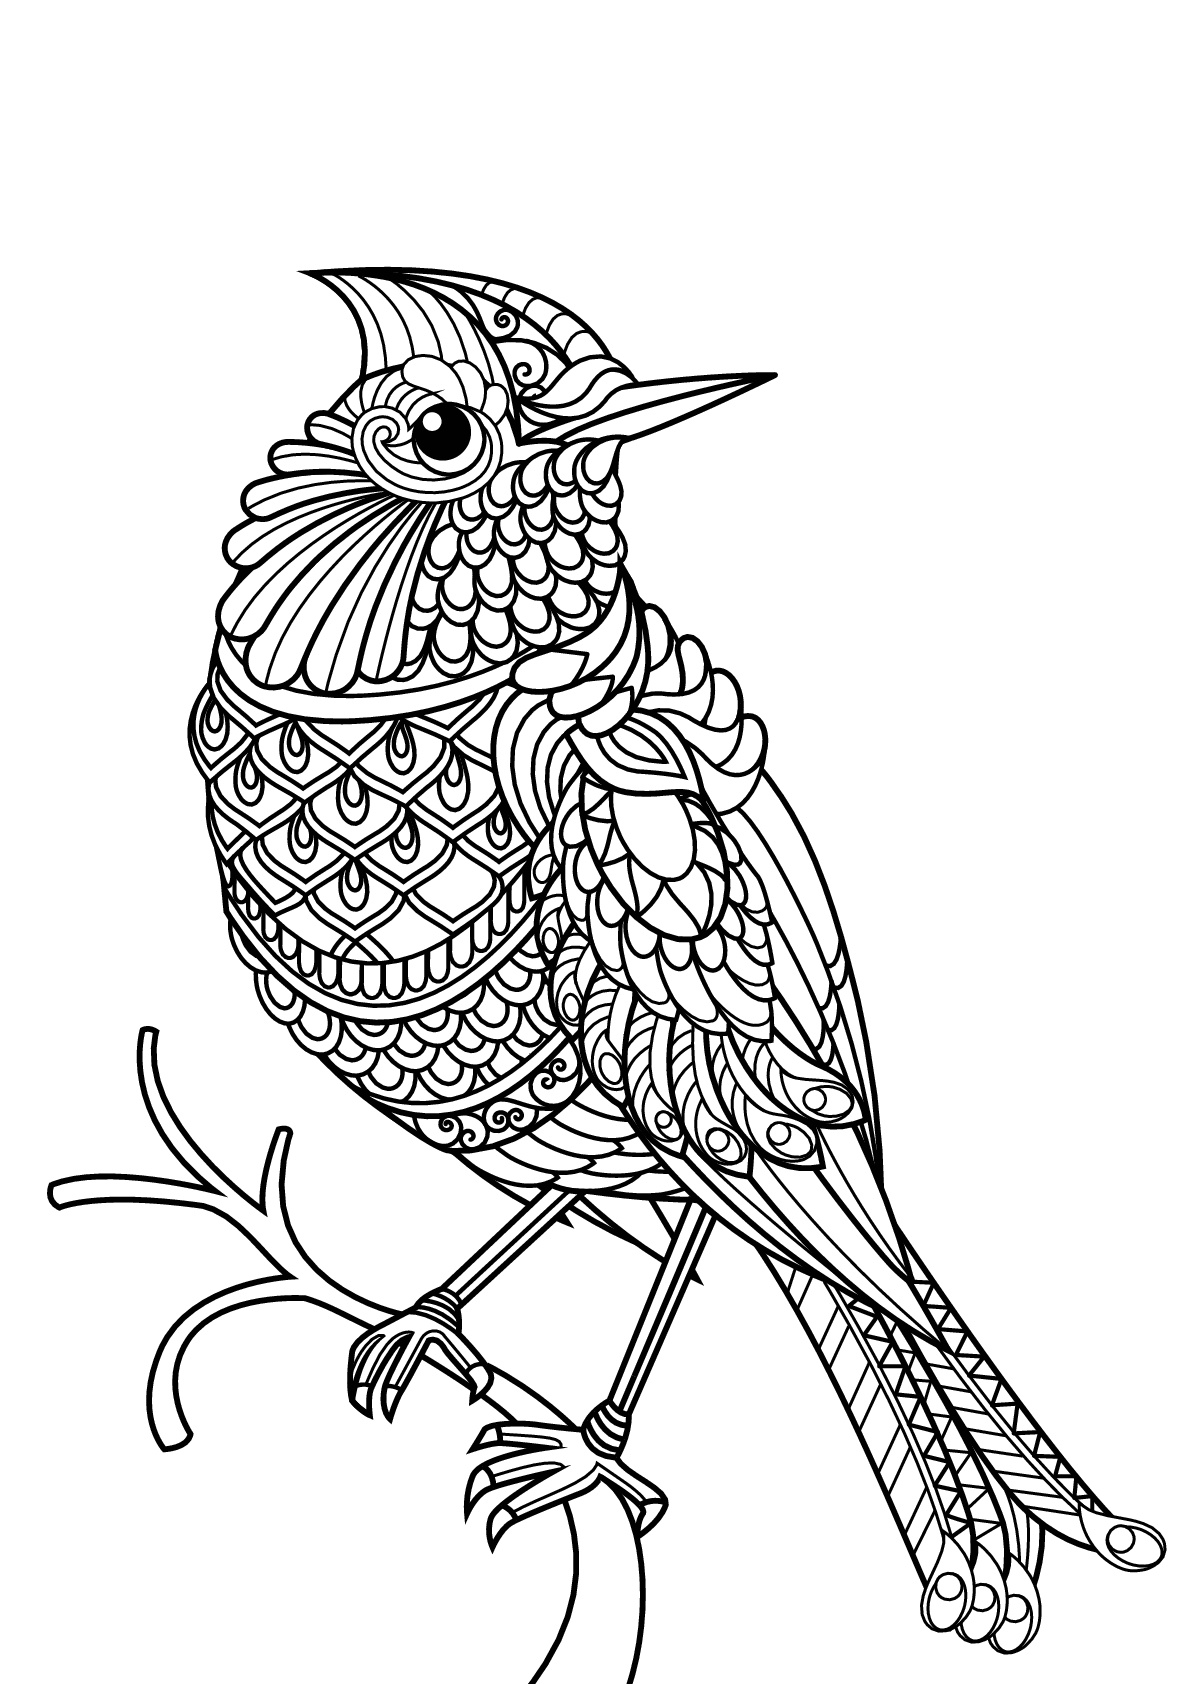 Birds free to color for children - Birds Kids Coloring Pages